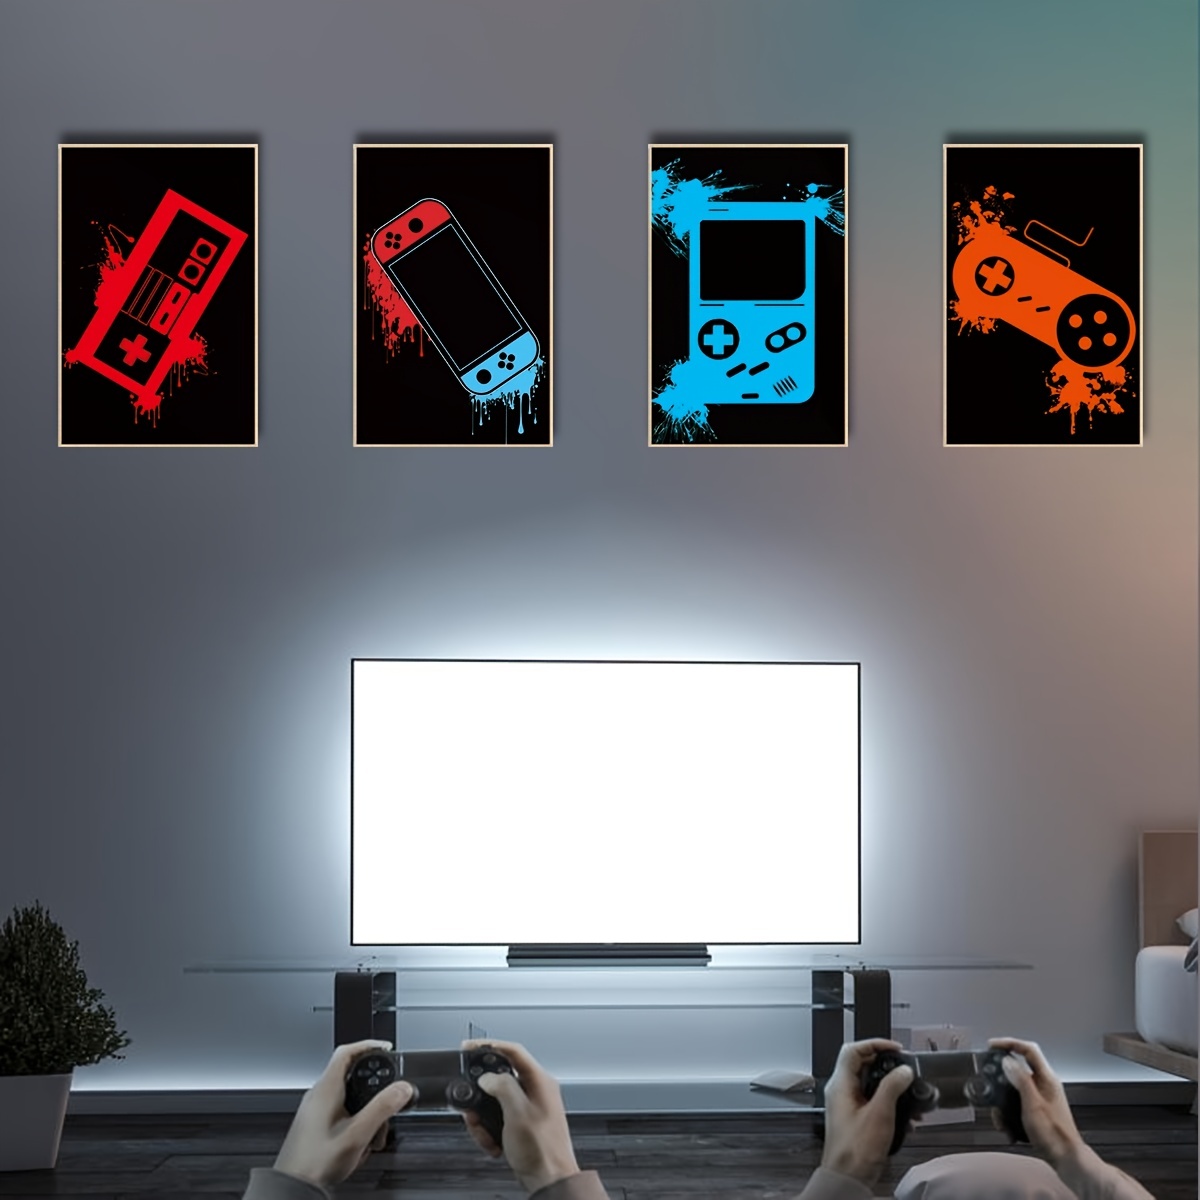 Neon Gaming Posters for Boys Room Decor - Gaming Room Decor - Boys Bedroom  Decor - Gamer Decor - Inspirational Posters for Video Game Room - Game Room